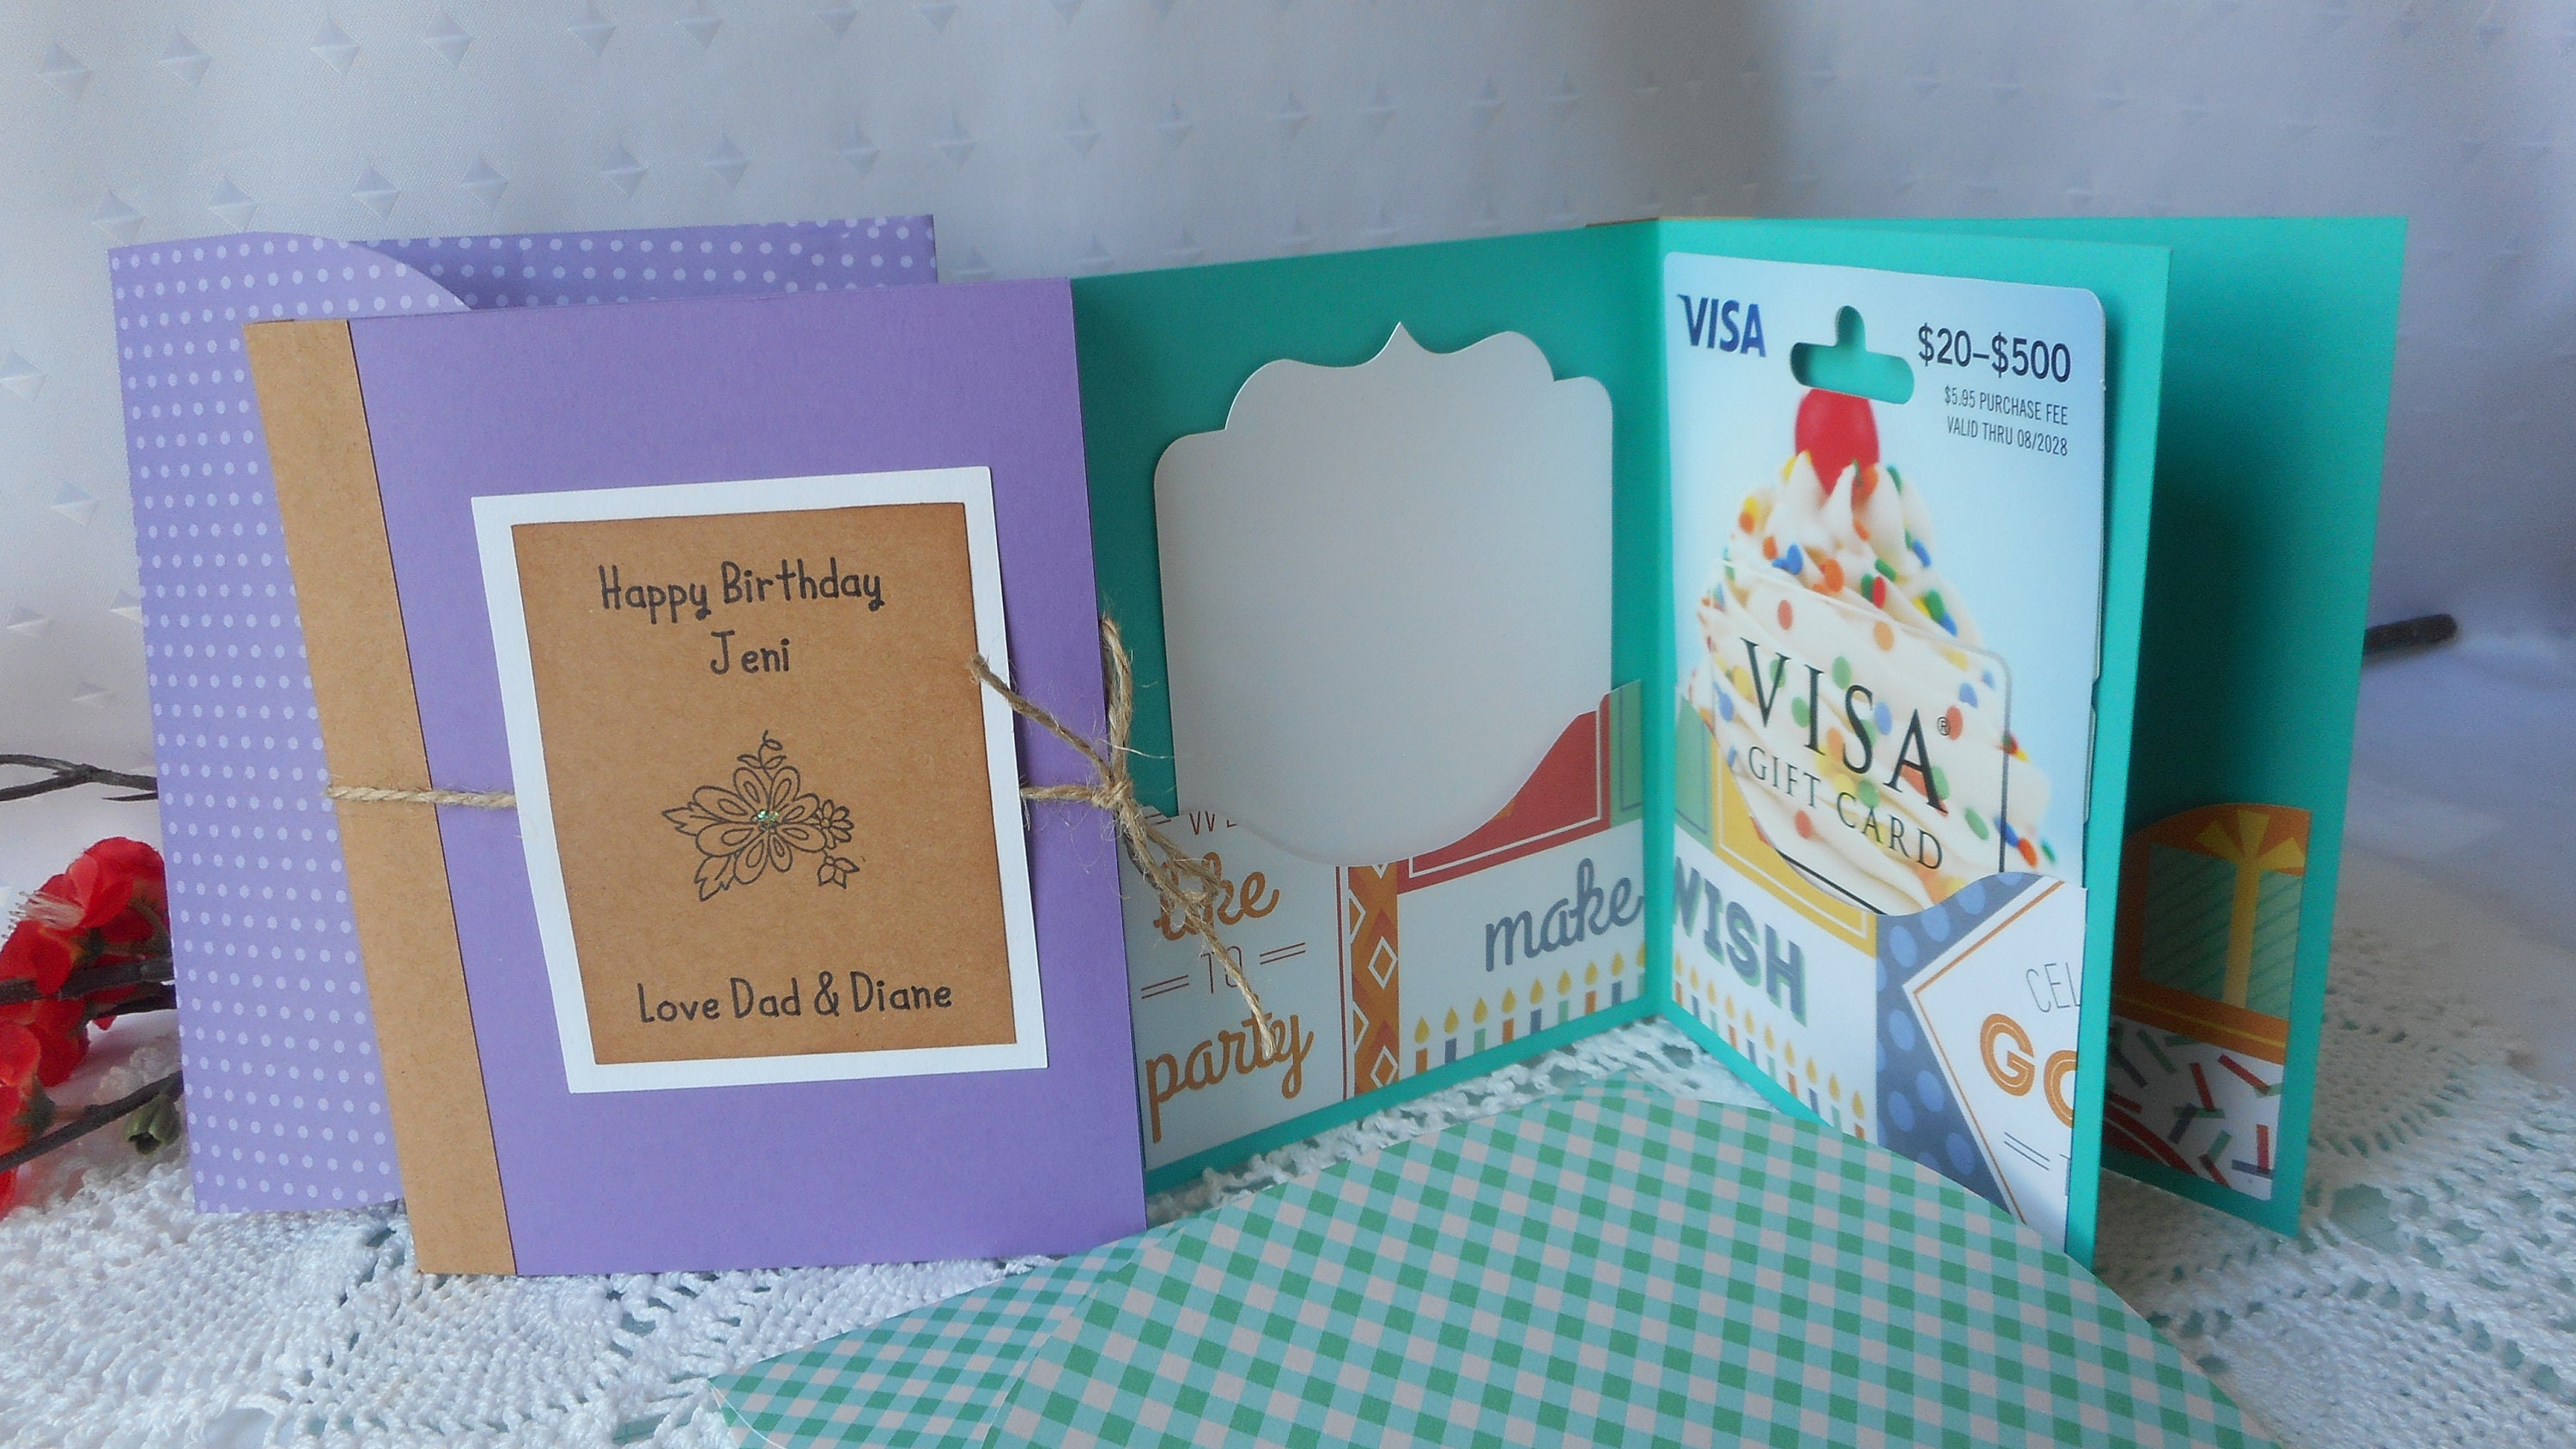 Lot of 5 Assorted Miscellaneous Occasion Gift Card Holders  Birthday  Love